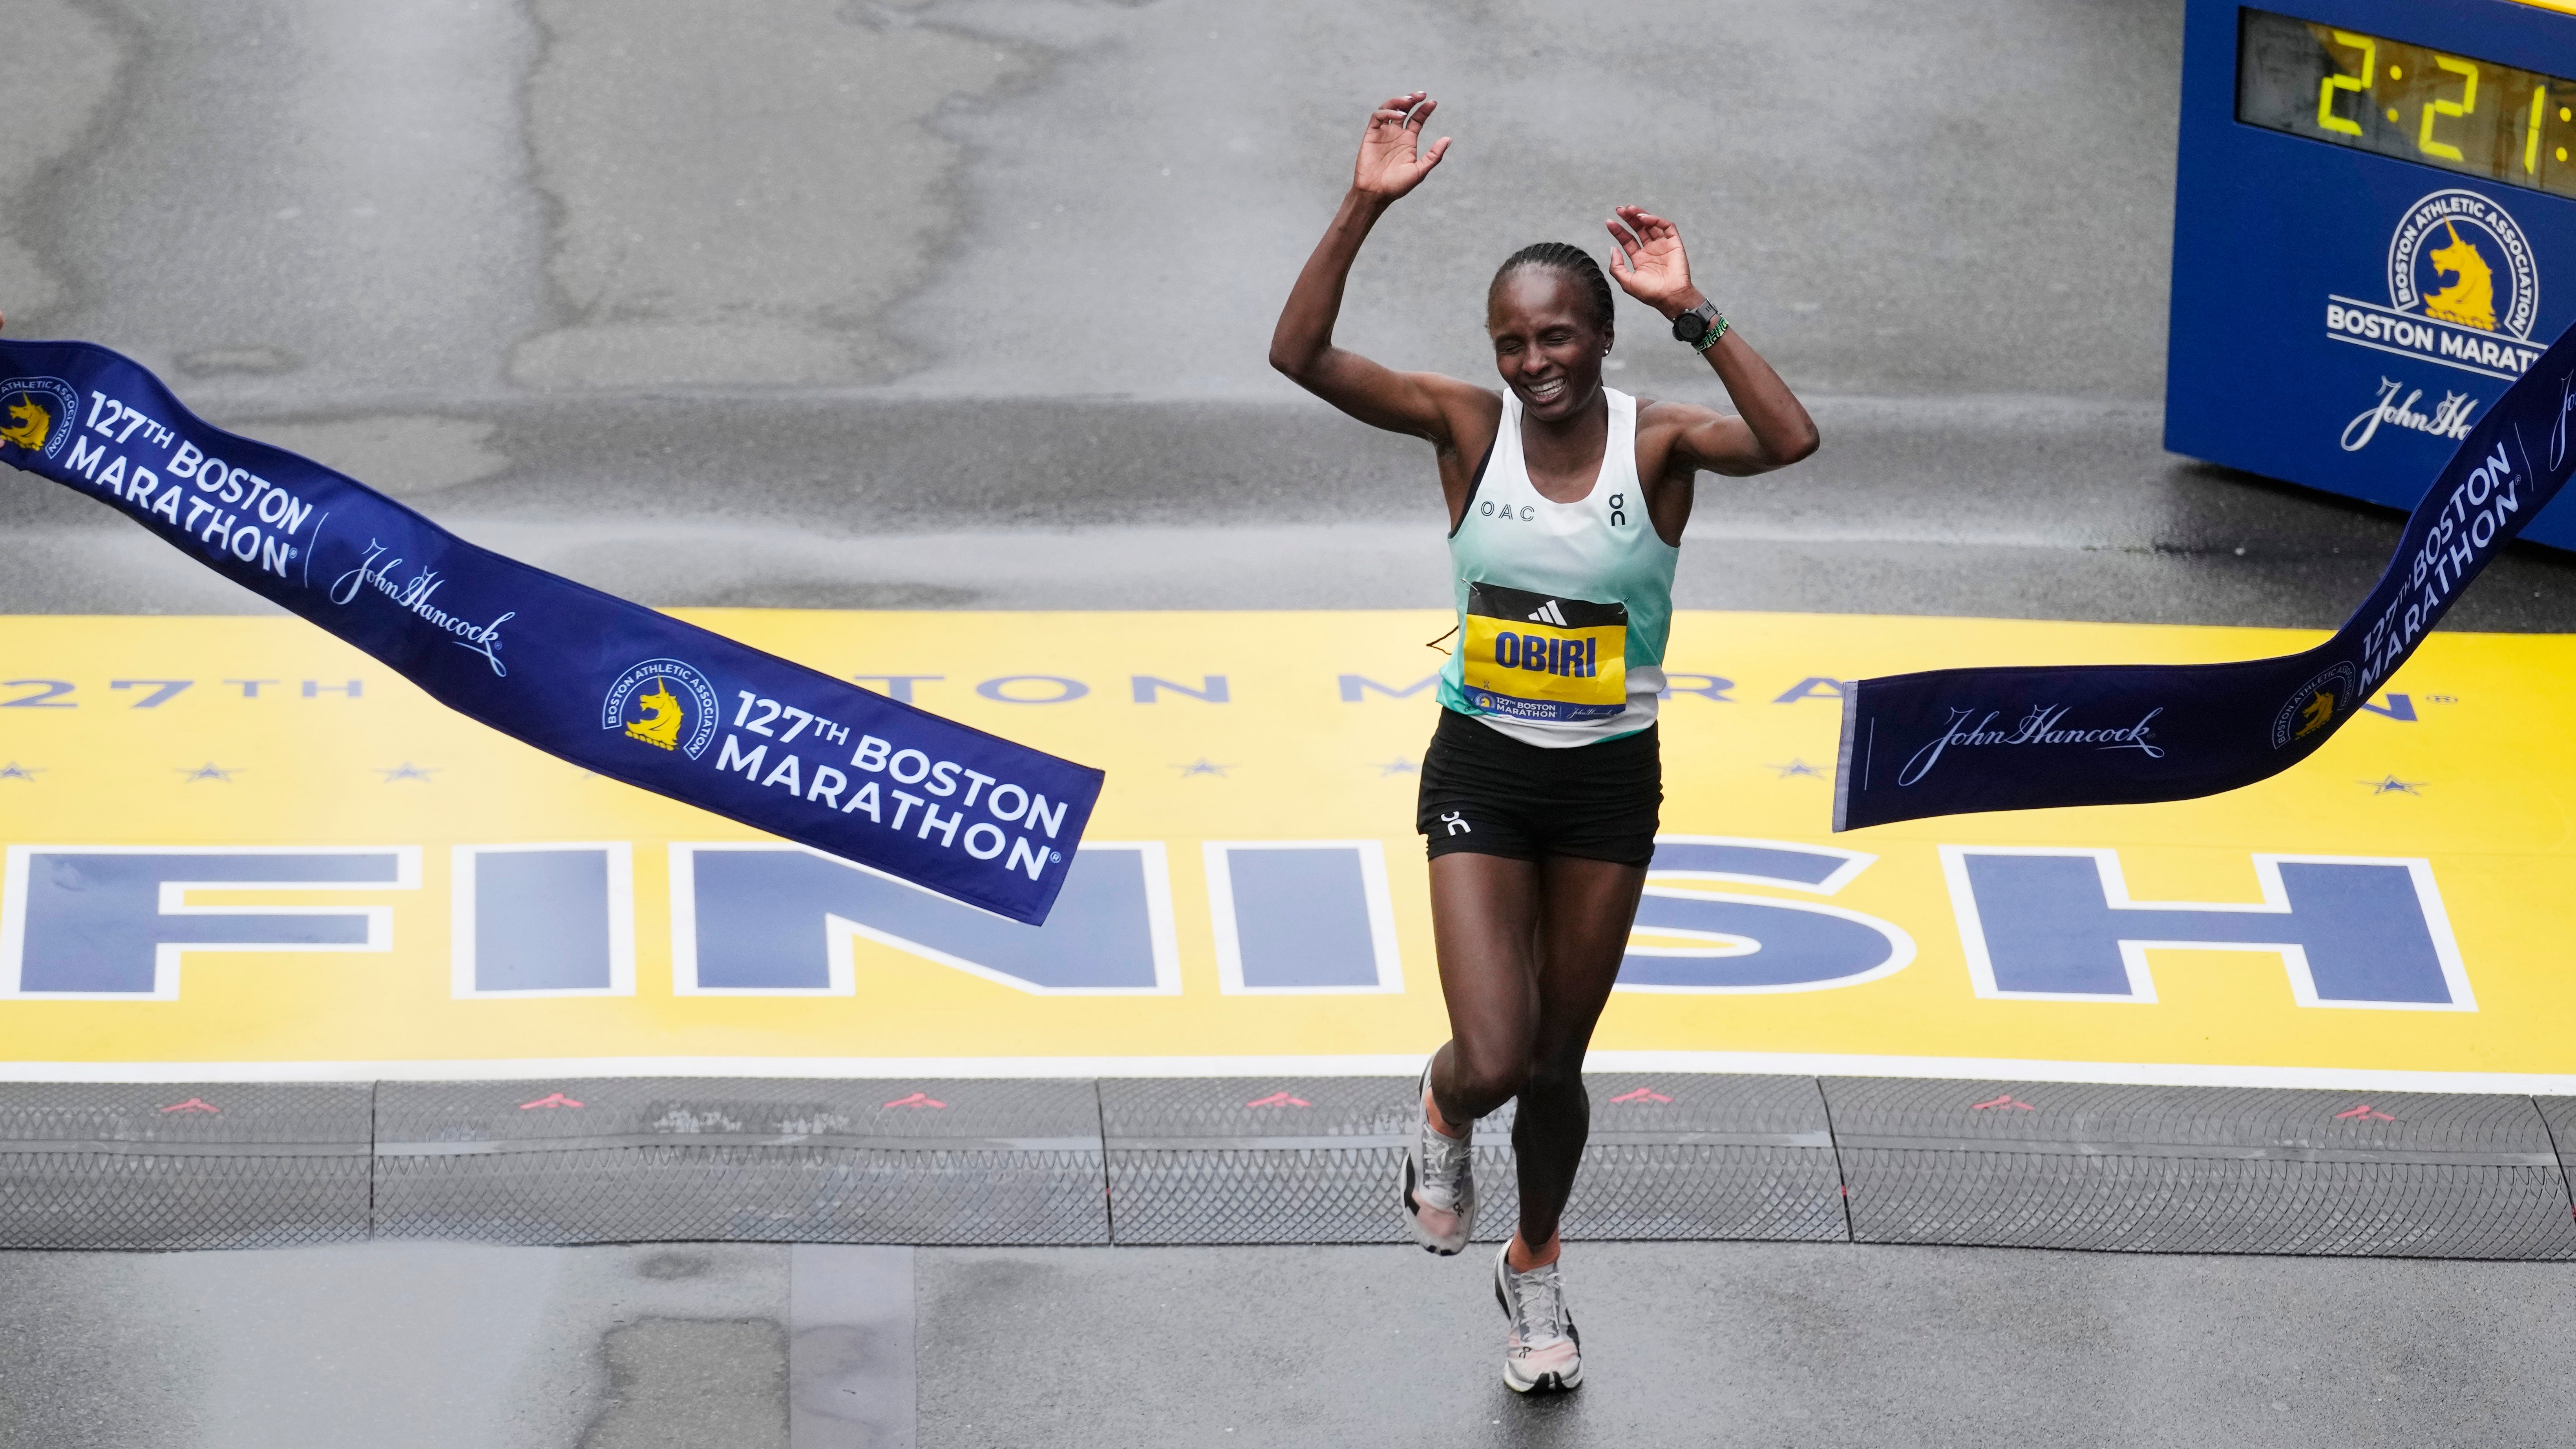 The Boston Marathon will again be hotly contested